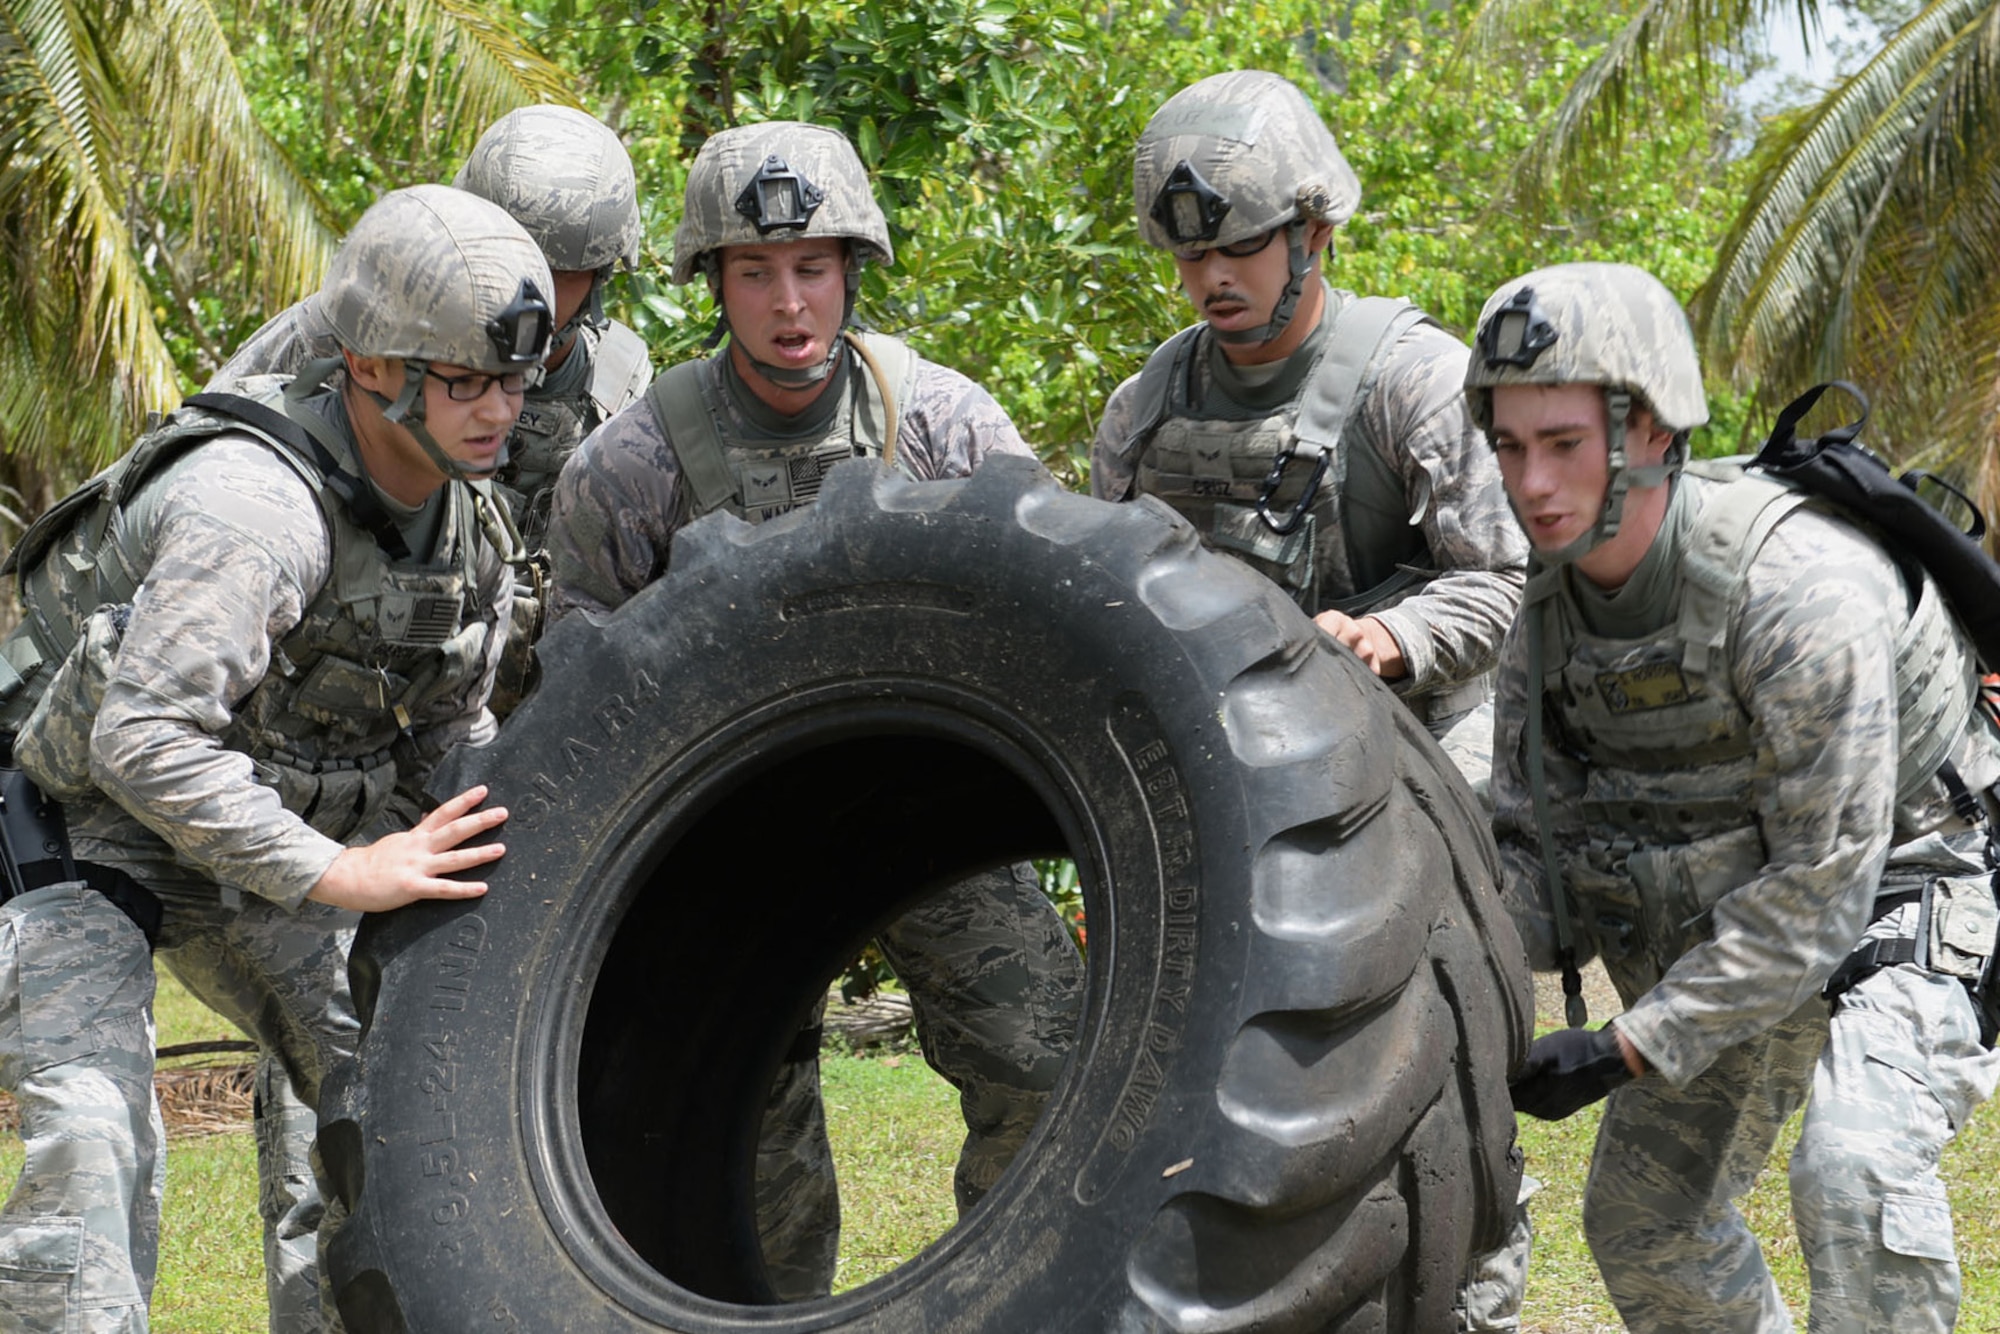 Airmen from the 36th Security Forces Squadron flip a tire during the Defender Challenge June 22, 2015, at Andersen Air Force Base, Guam. Airmen tested their physical and mental strength through various obstacles and challenges during the competition, ending with a live-fire shooting course. (U.S. Air Force photo by Airman 1st Class Joshua Smoot/Released)